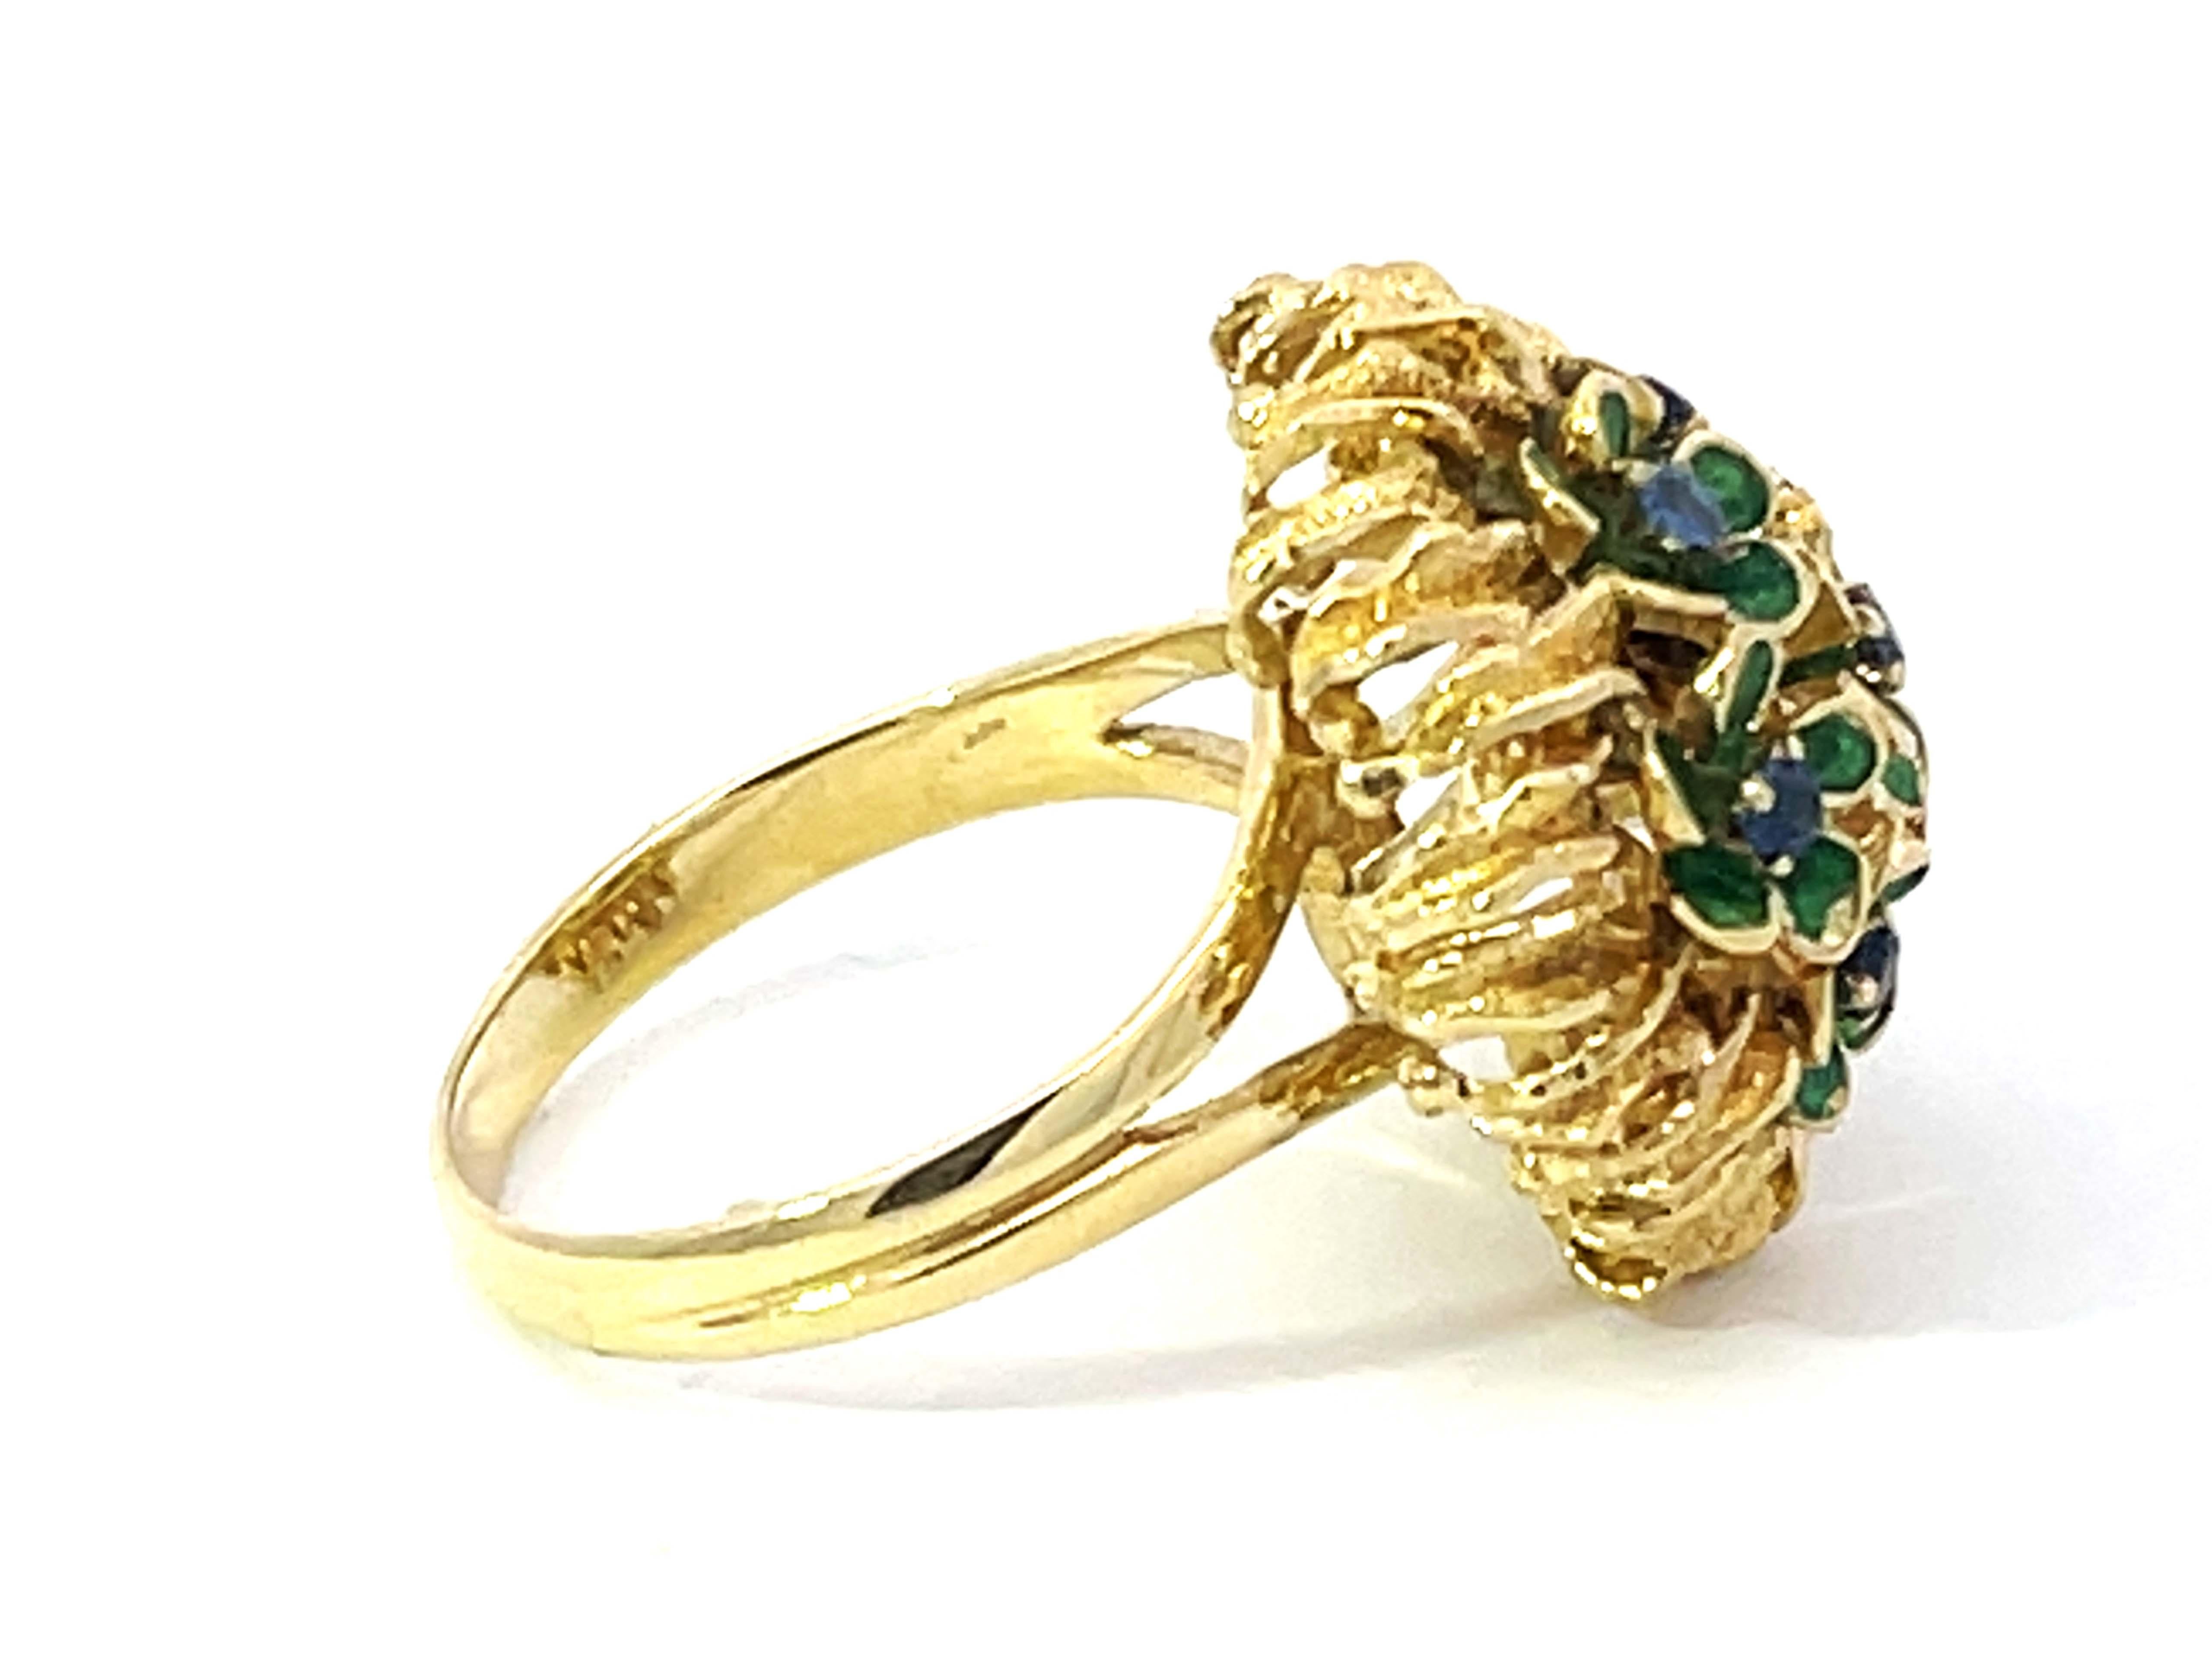 Sapphire Green Enamel Flowers Flower Ring Solid 18k Yellow Gold In Excellent Condition For Sale In Honolulu, HI